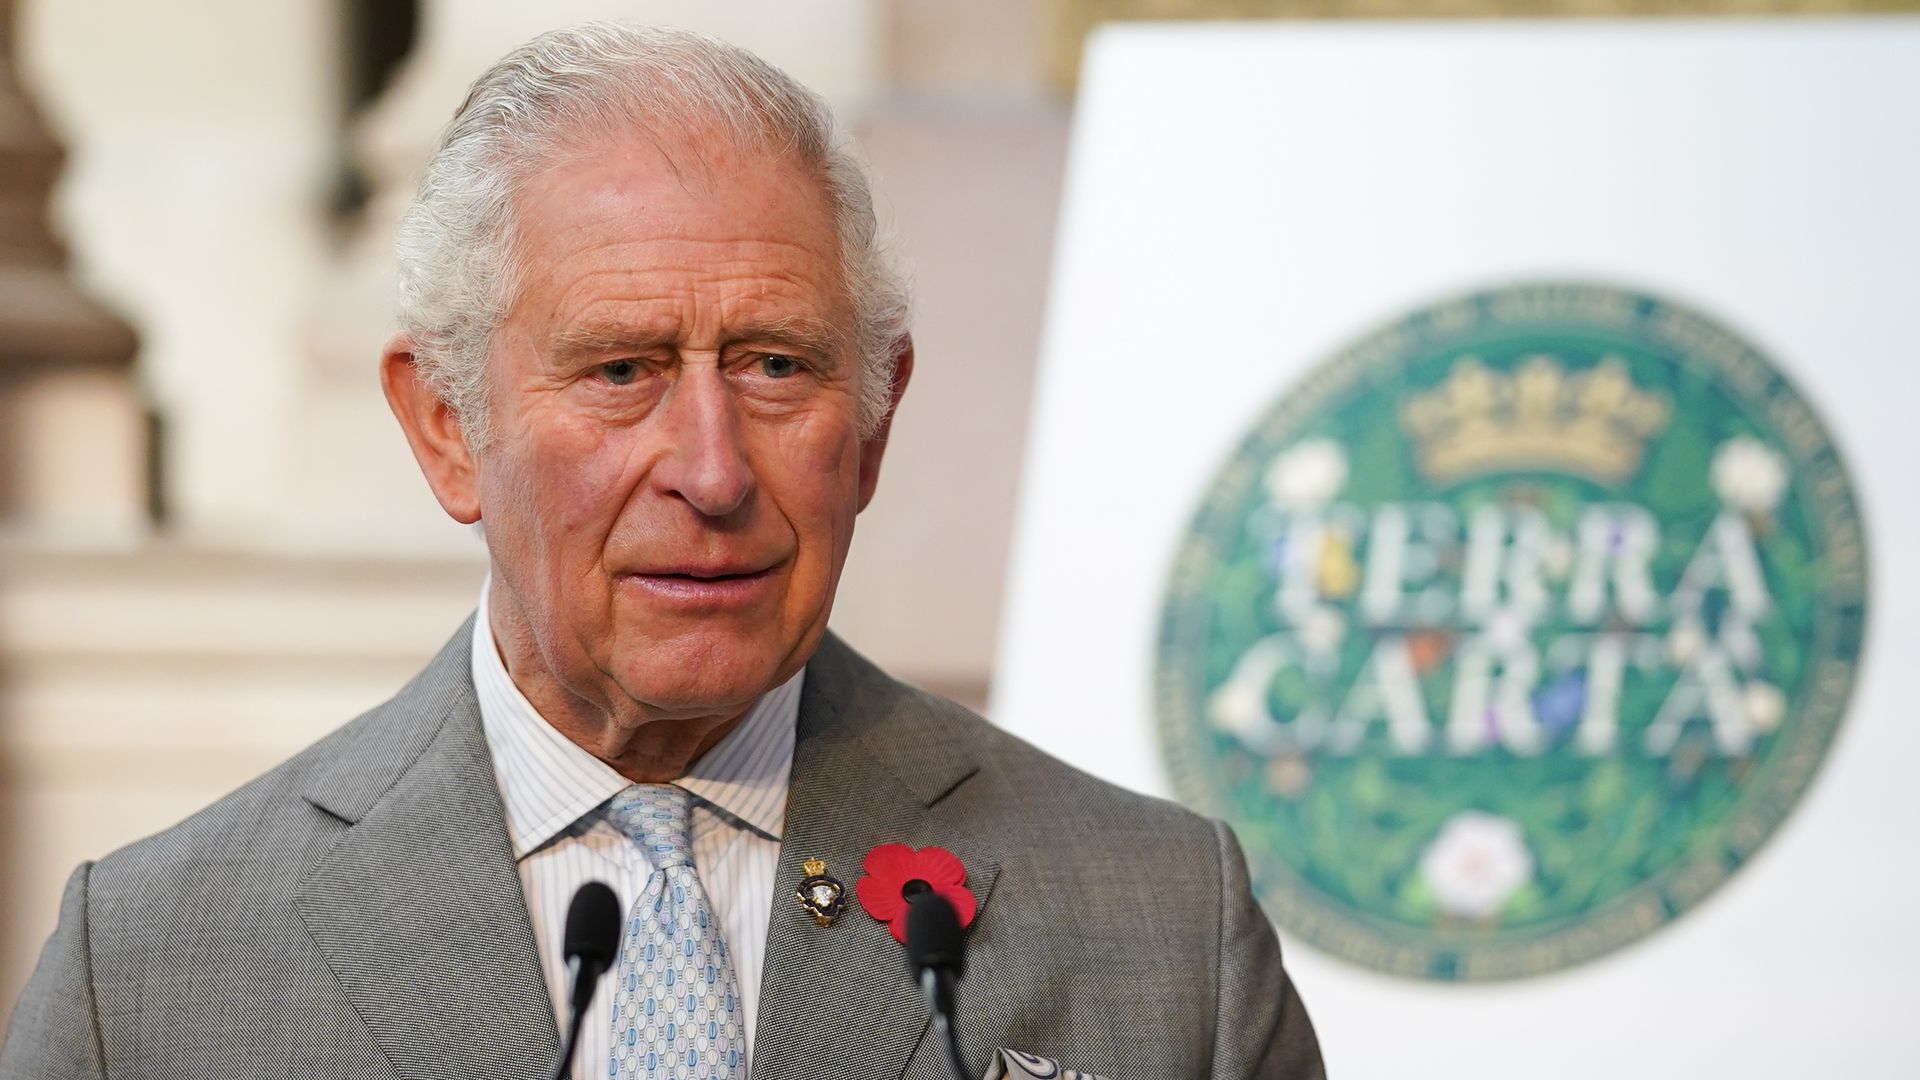 Aka: King Charles wearing a grey suit and patterned blue and white tie with circular green Terra Carta emblem in the background